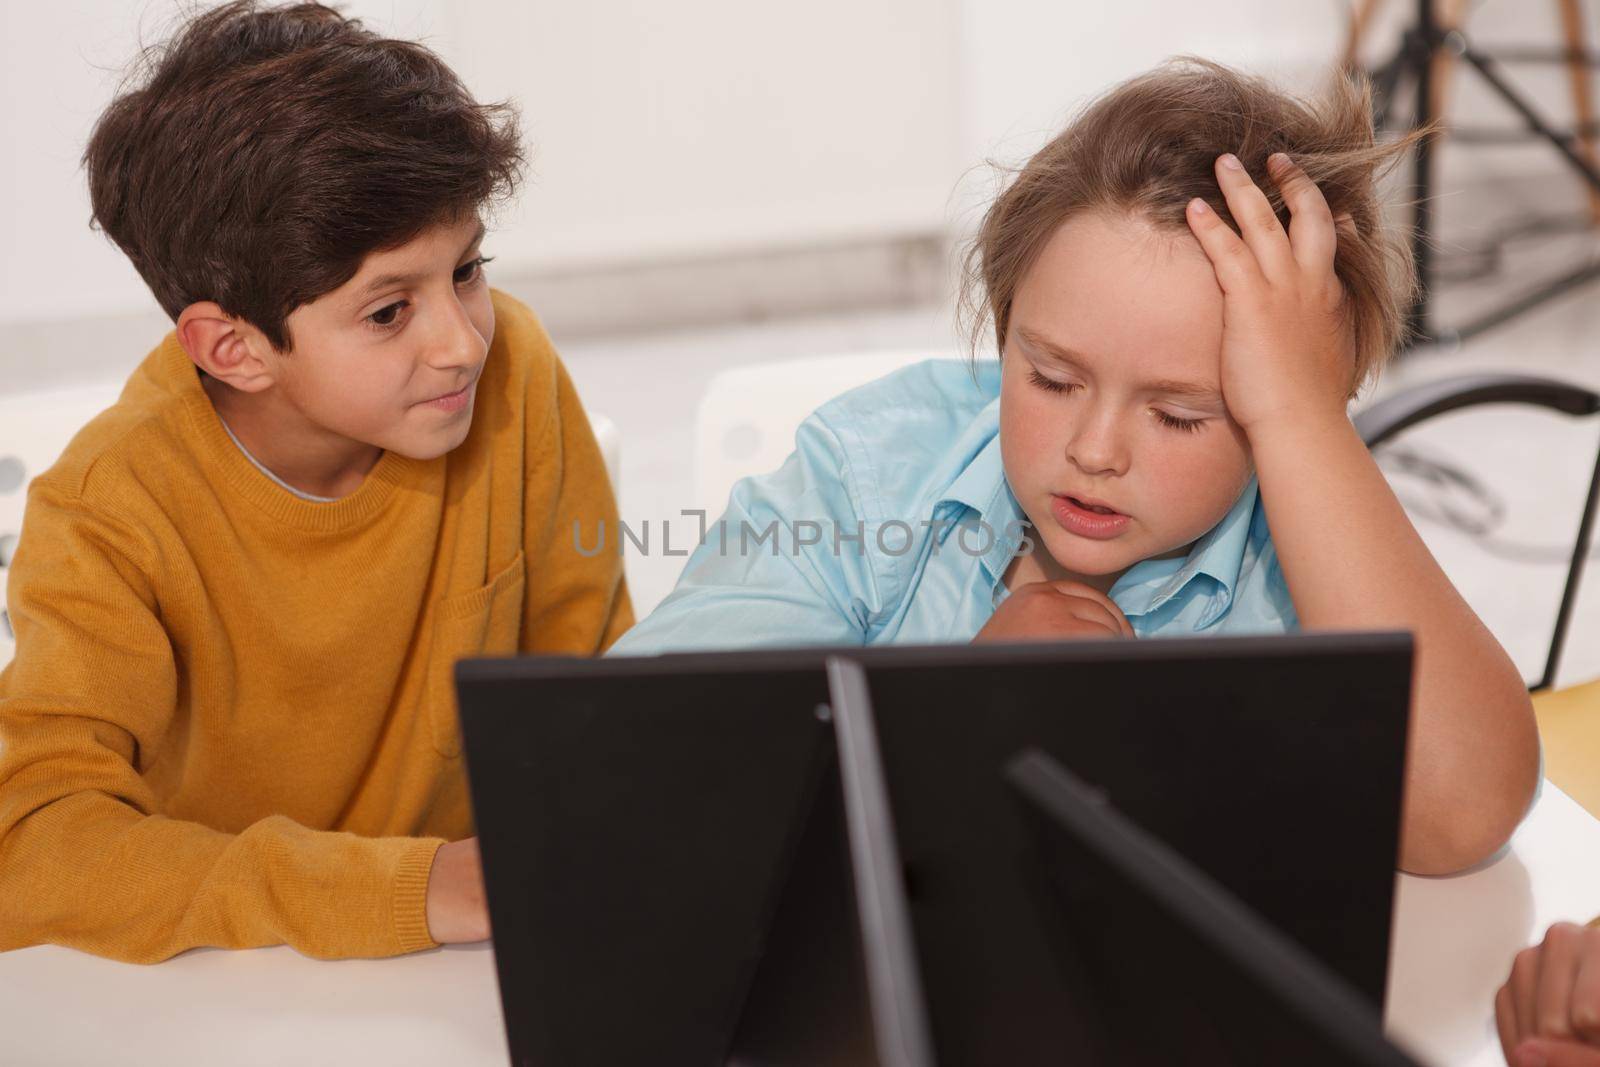 Adorable schoolboy looking tired, working on a school project with his friend, using laptop